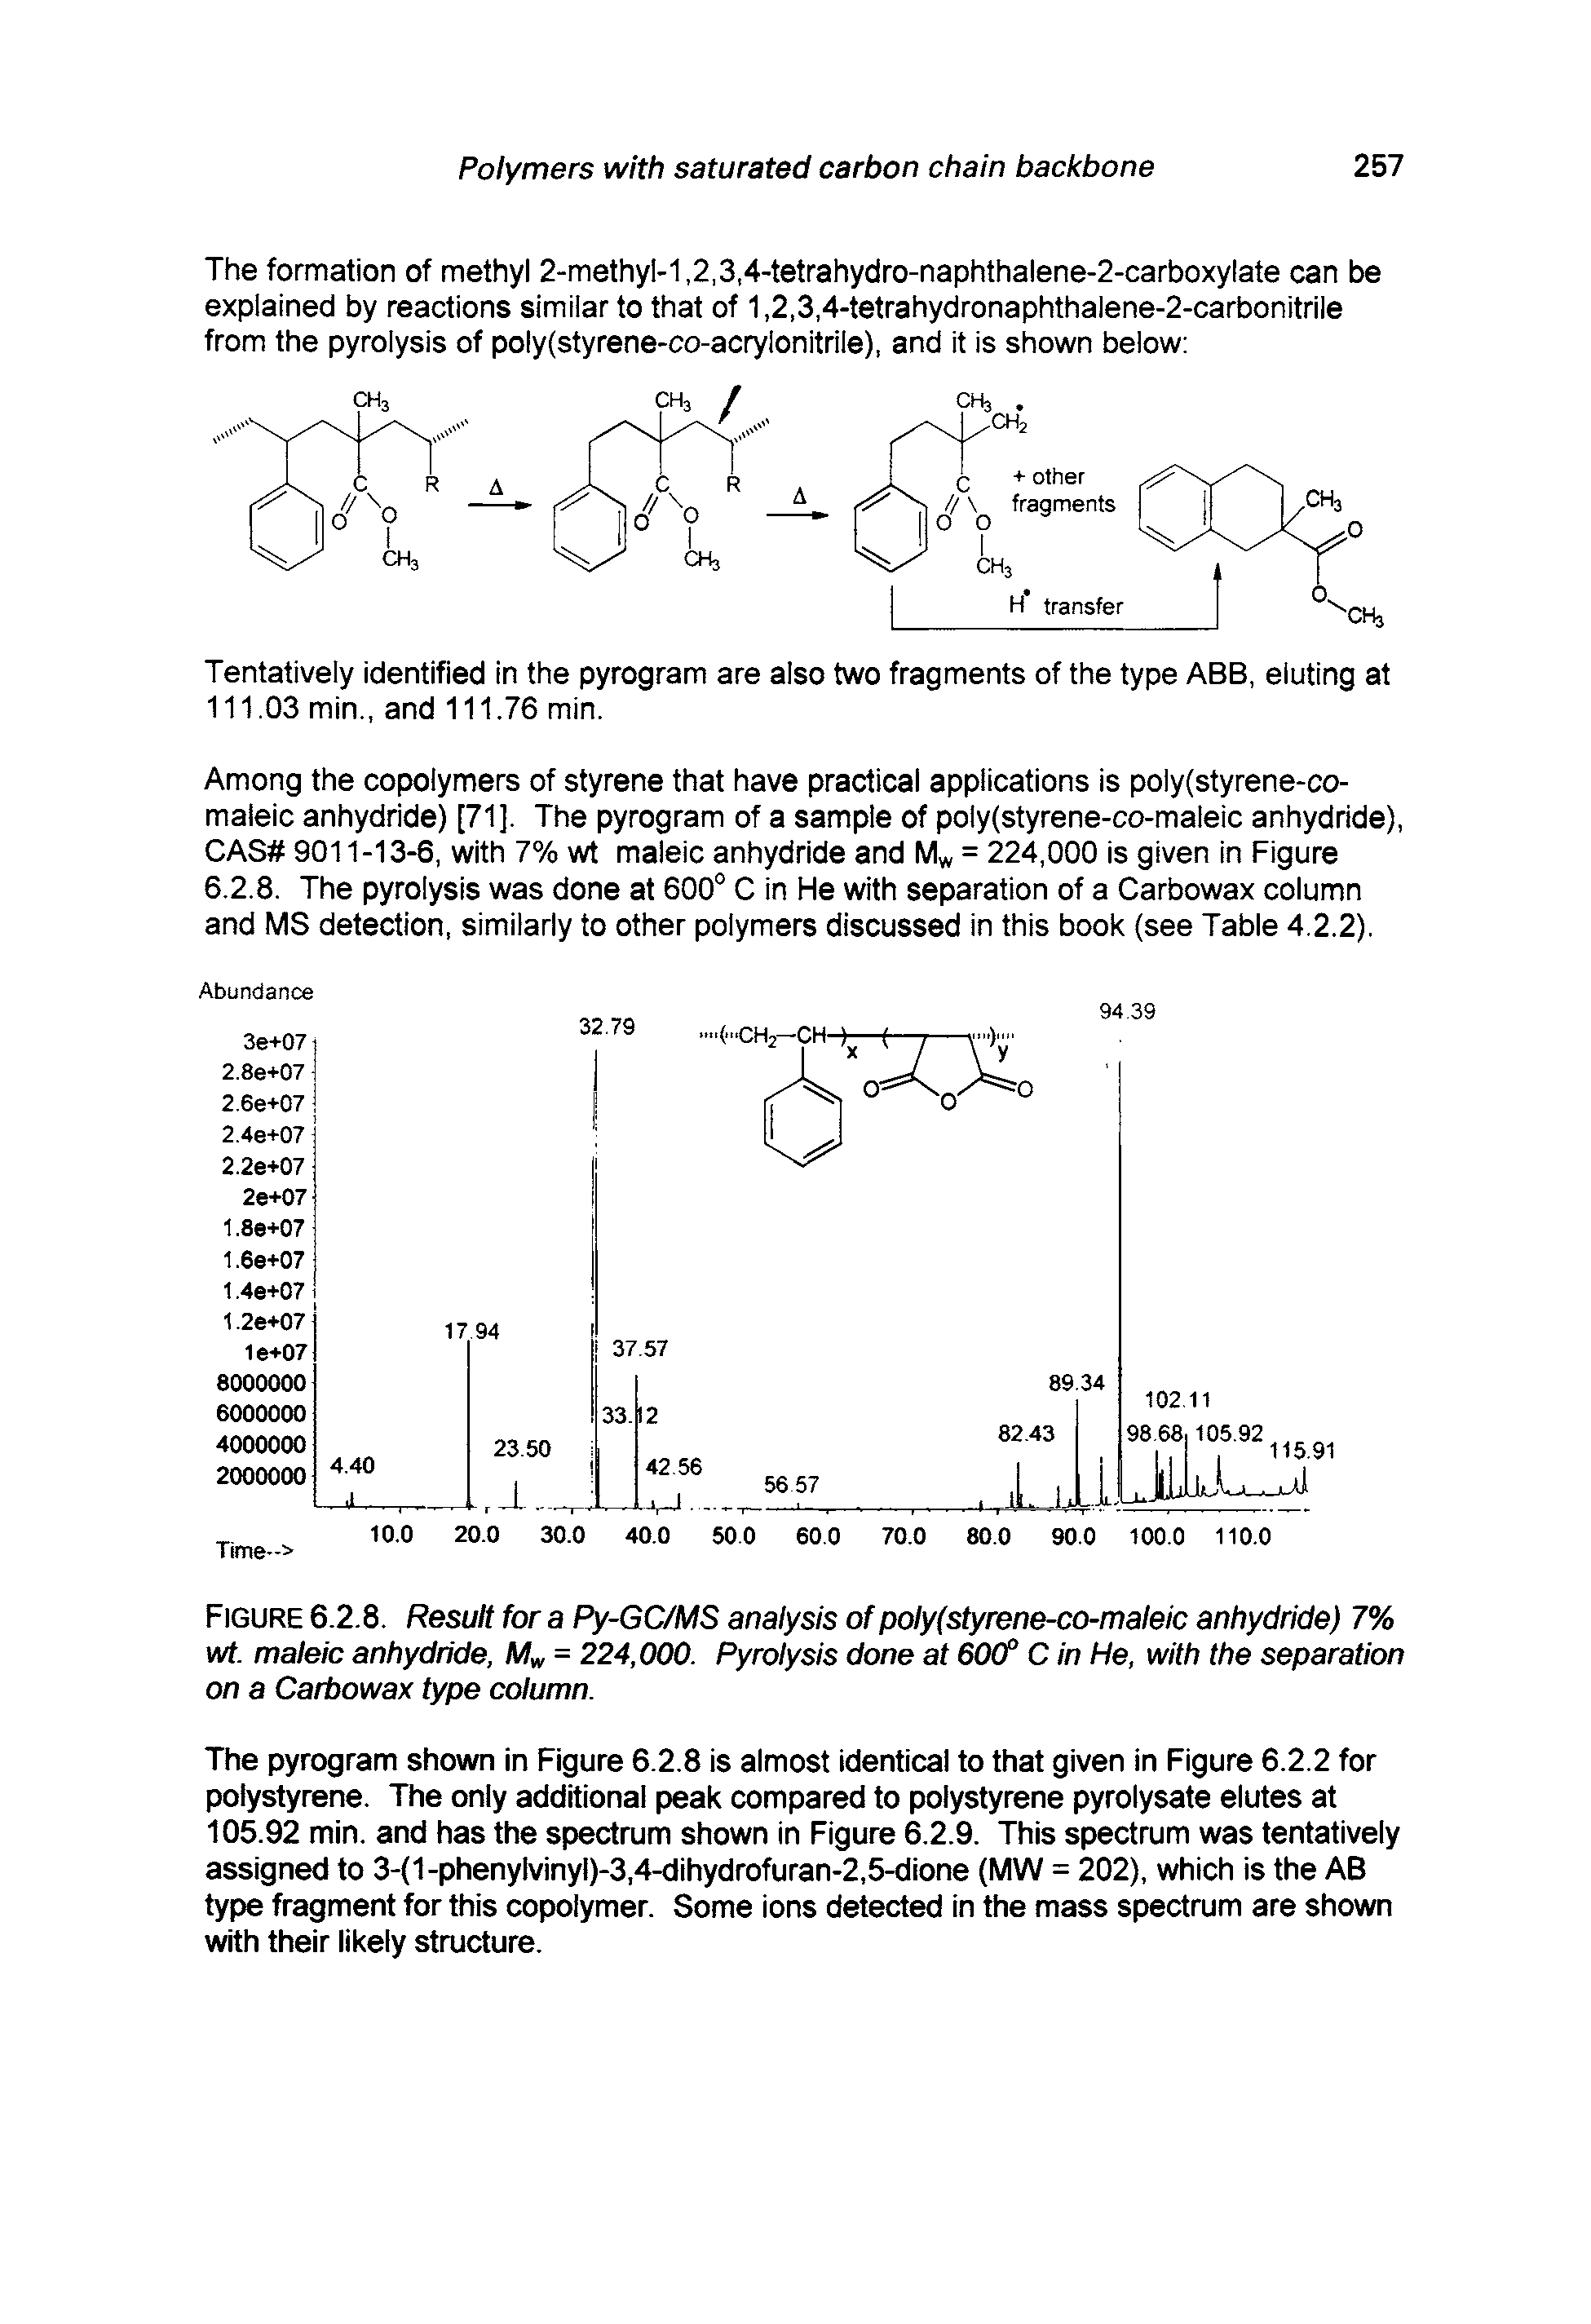 Figure 6.2.8. Result for a Py-GC/MS analysis of poly(styrene-co-maleic anhydride) 7% wt. maleic anhydride, M = 224,000. Pyrolysis done at 60(f C in He, with the separation on a Carbowax type column.